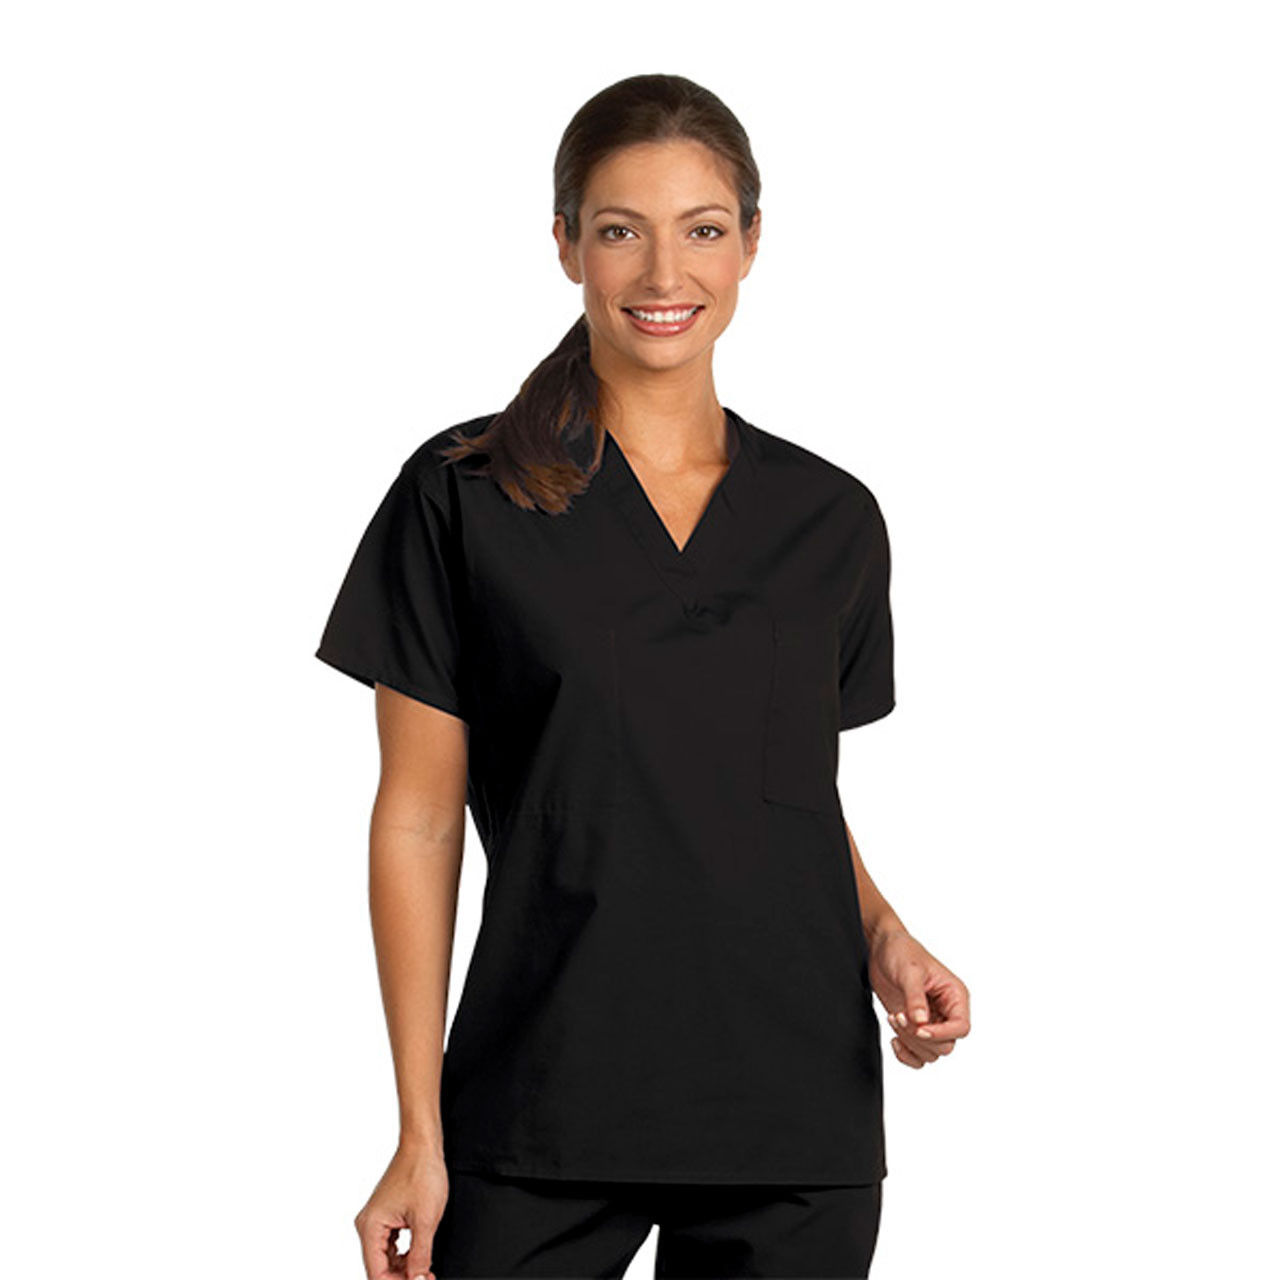 Are these black medical scrubs unisex?